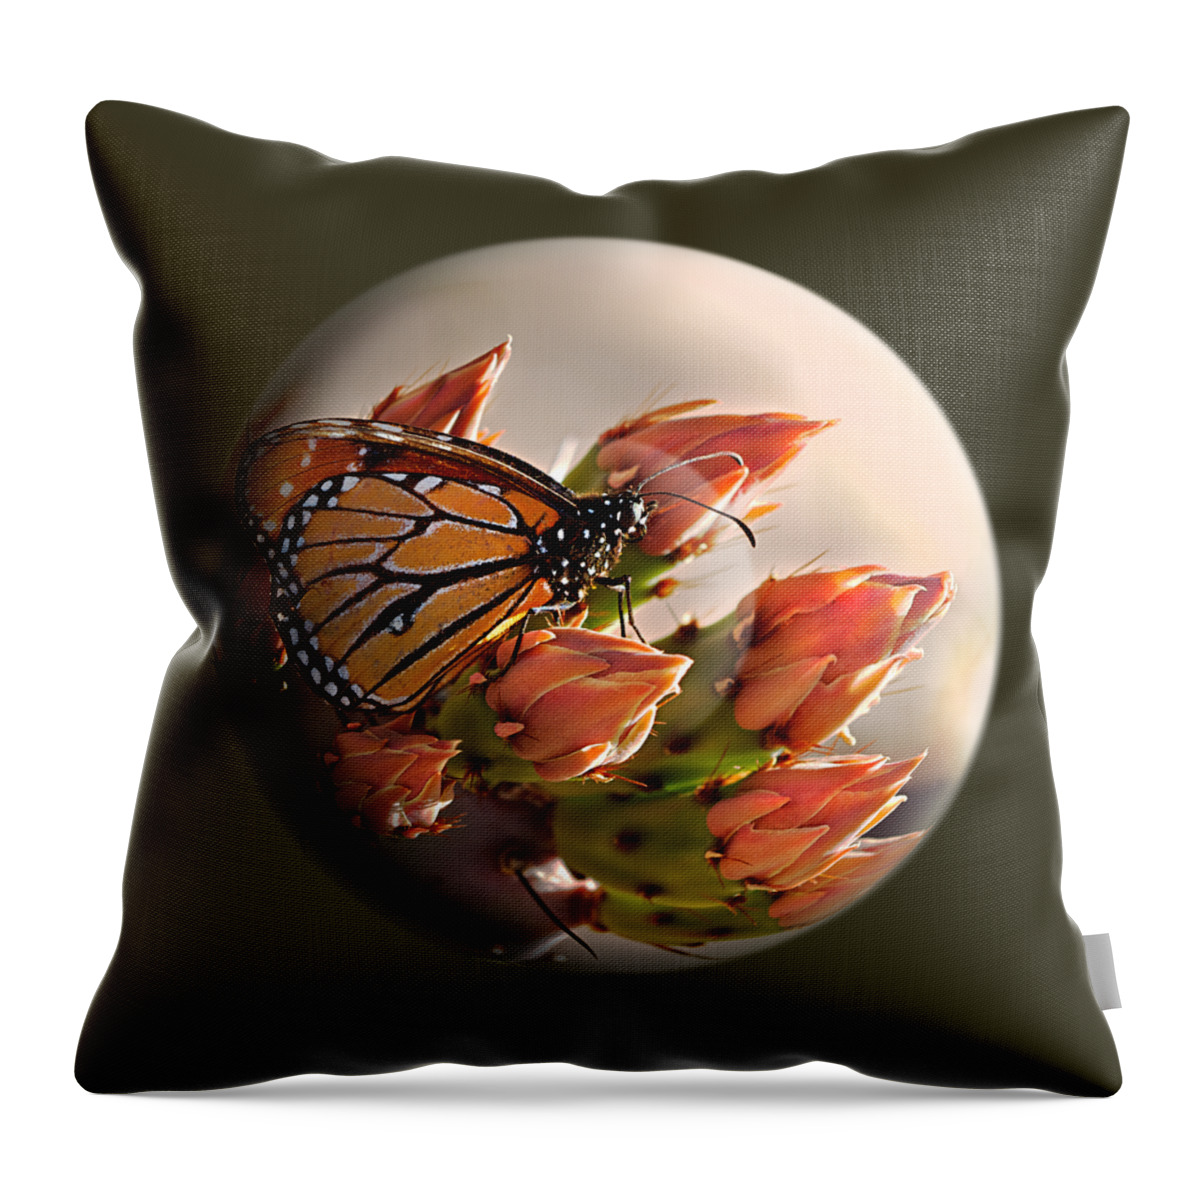 Butterfly Throw Pillow featuring the photograph Butterfly In A Globe by Phyllis Denton